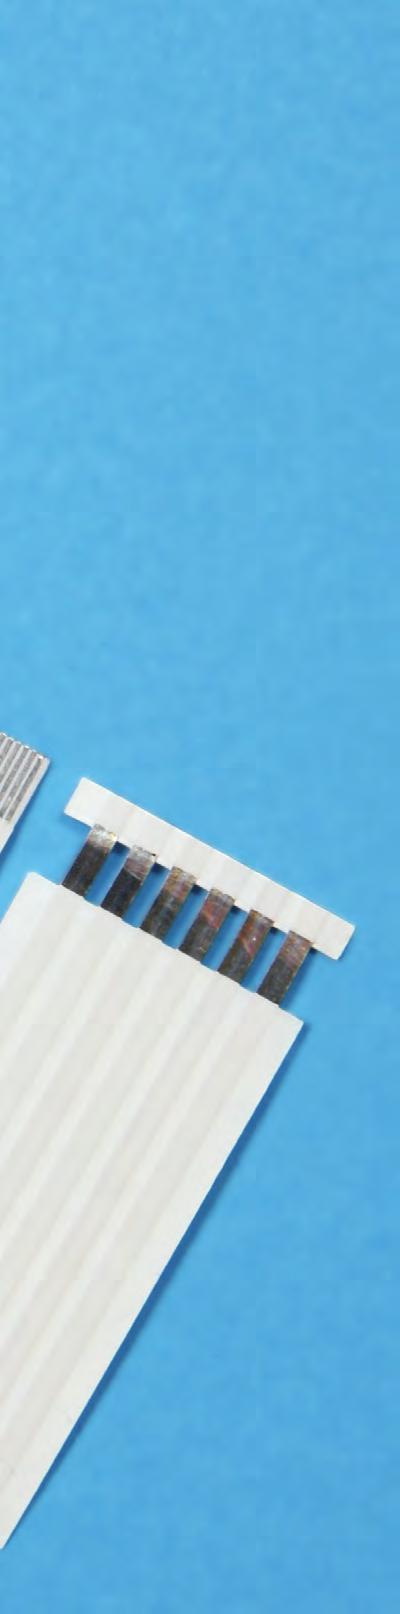 I OUR PRODUCTS & P/N 15 OUR PRODUCTS OUR PRODUCTS AND P/N Standard product range & specific requirements We are a leading manufacturer of a wide variety of standard and custom FFC cables.